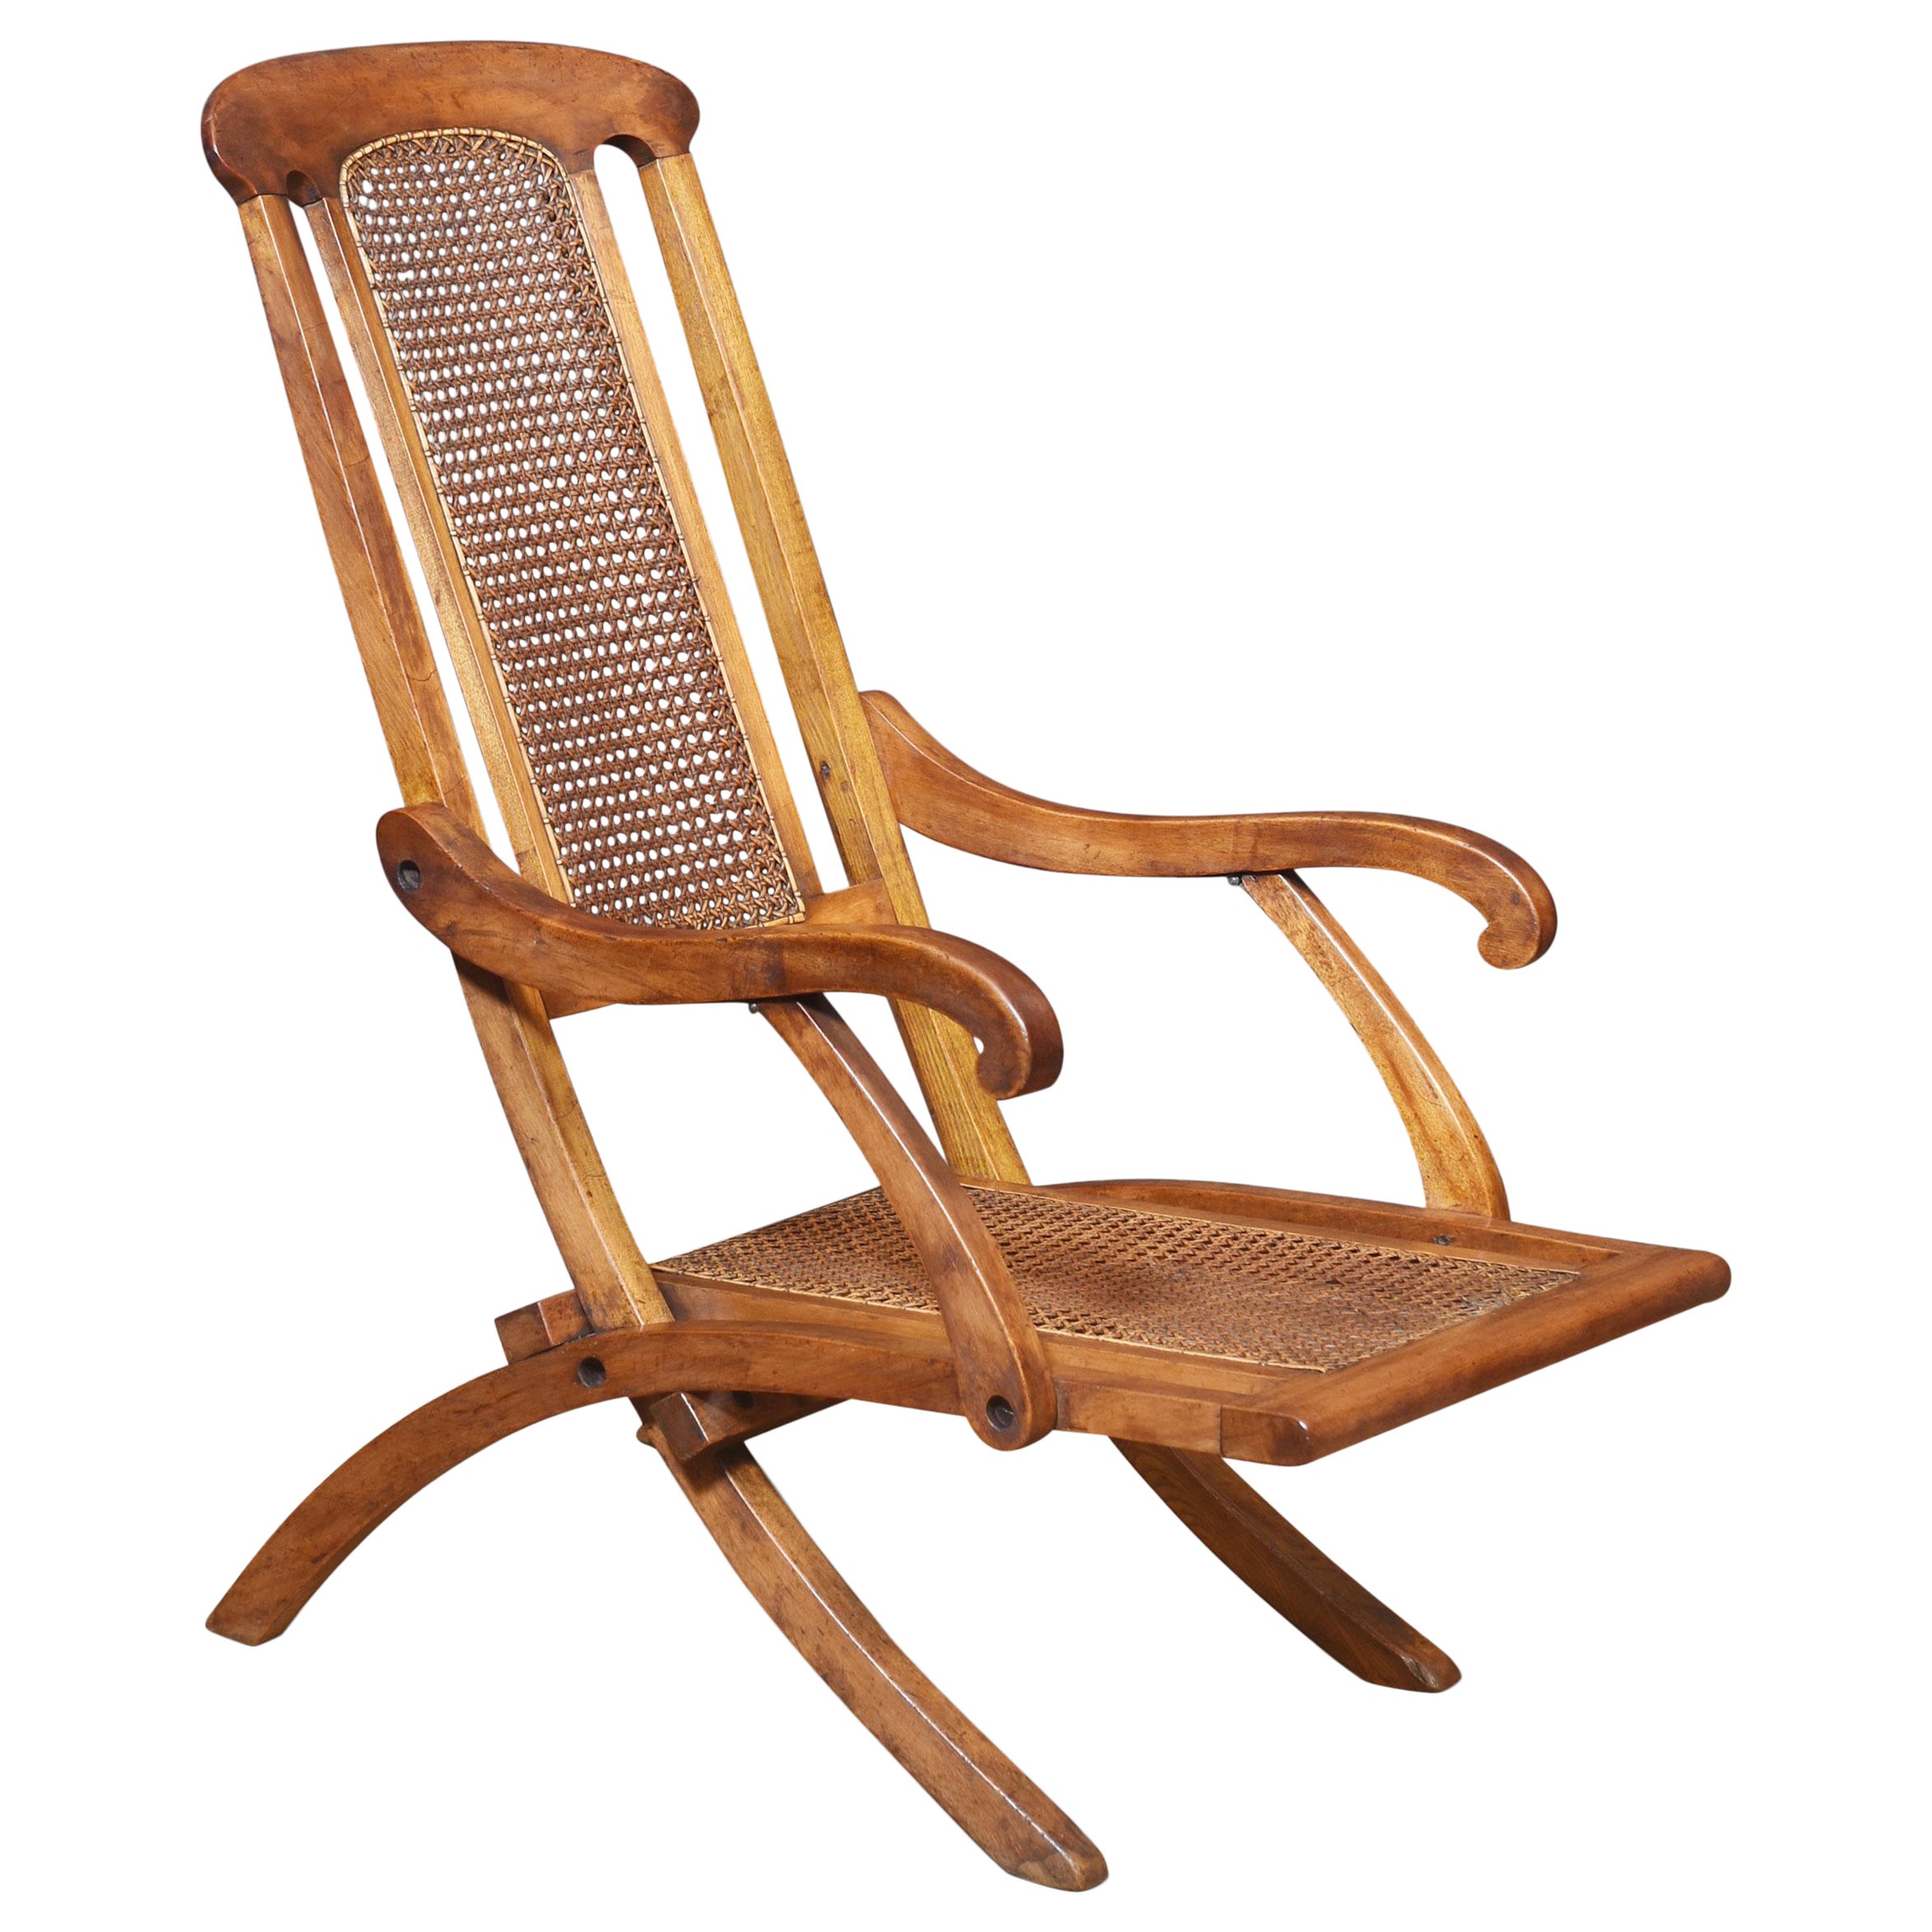 What is the most comfortable outdoor chair?